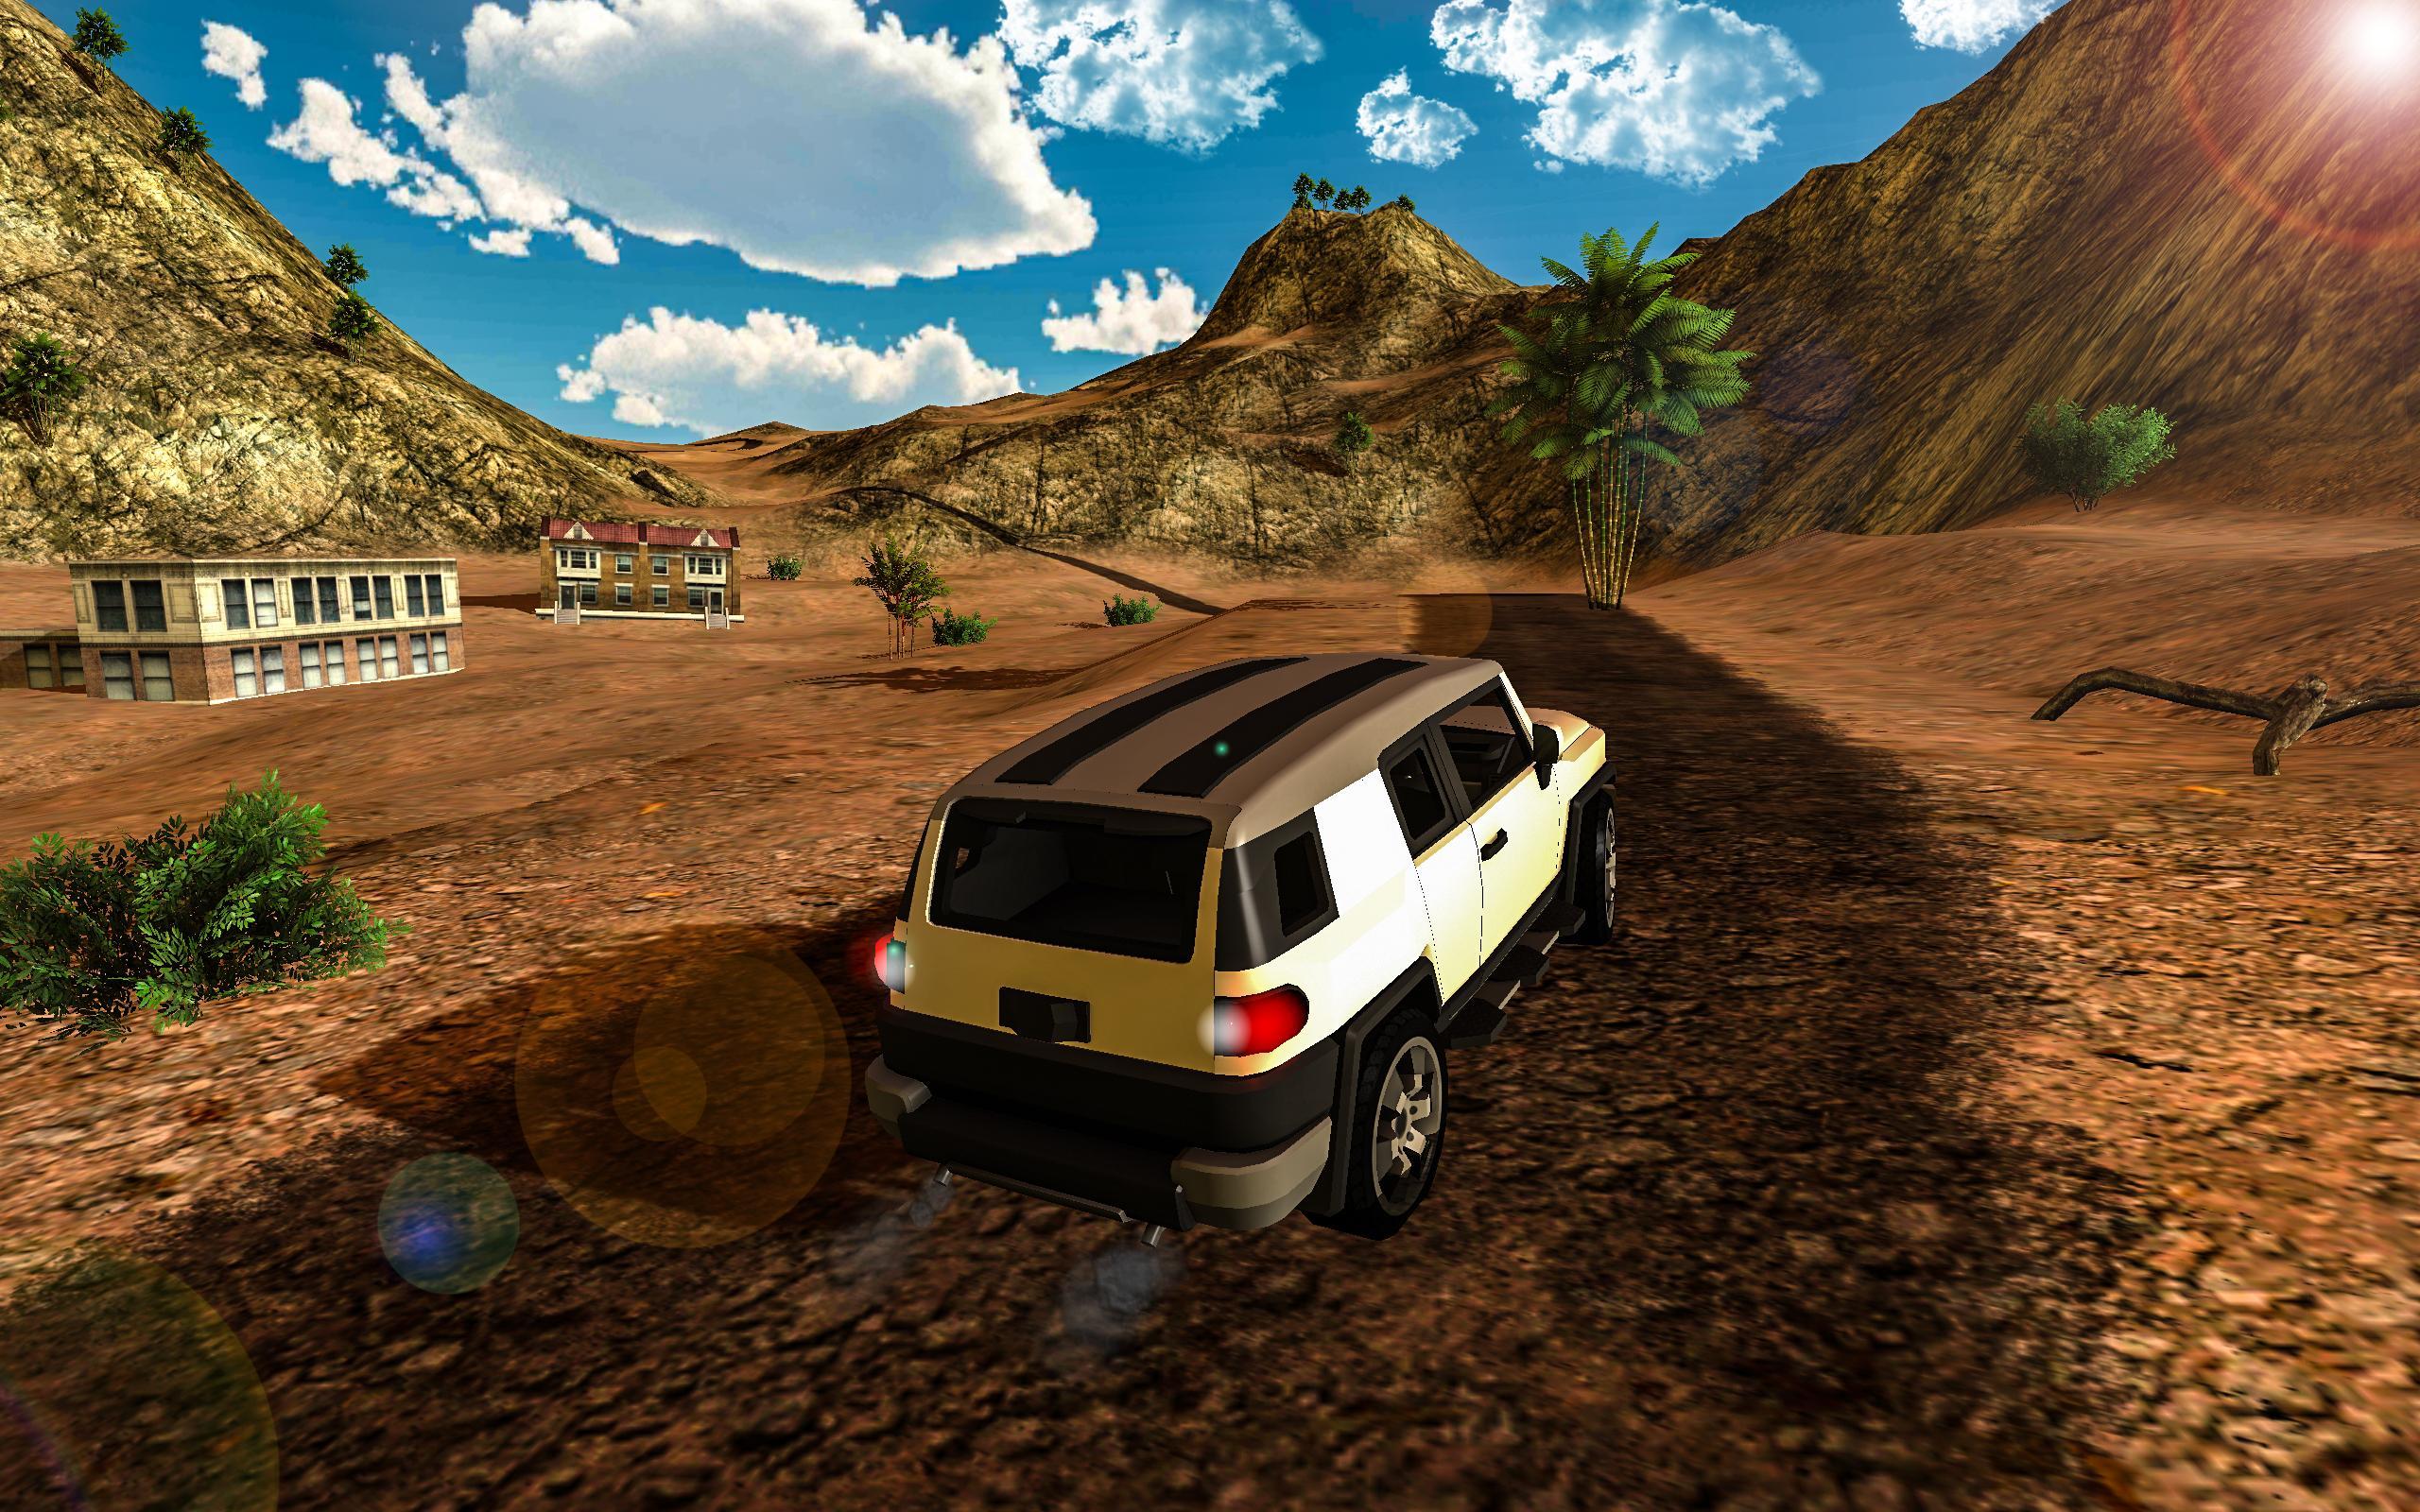 Jeep 4x4 игра. Offroad 4x4 2002 игра. Off Road 4x4 Jeep Racing Xtreme 3d. Offroad Android 4x4 игра. Игры про оффроуд